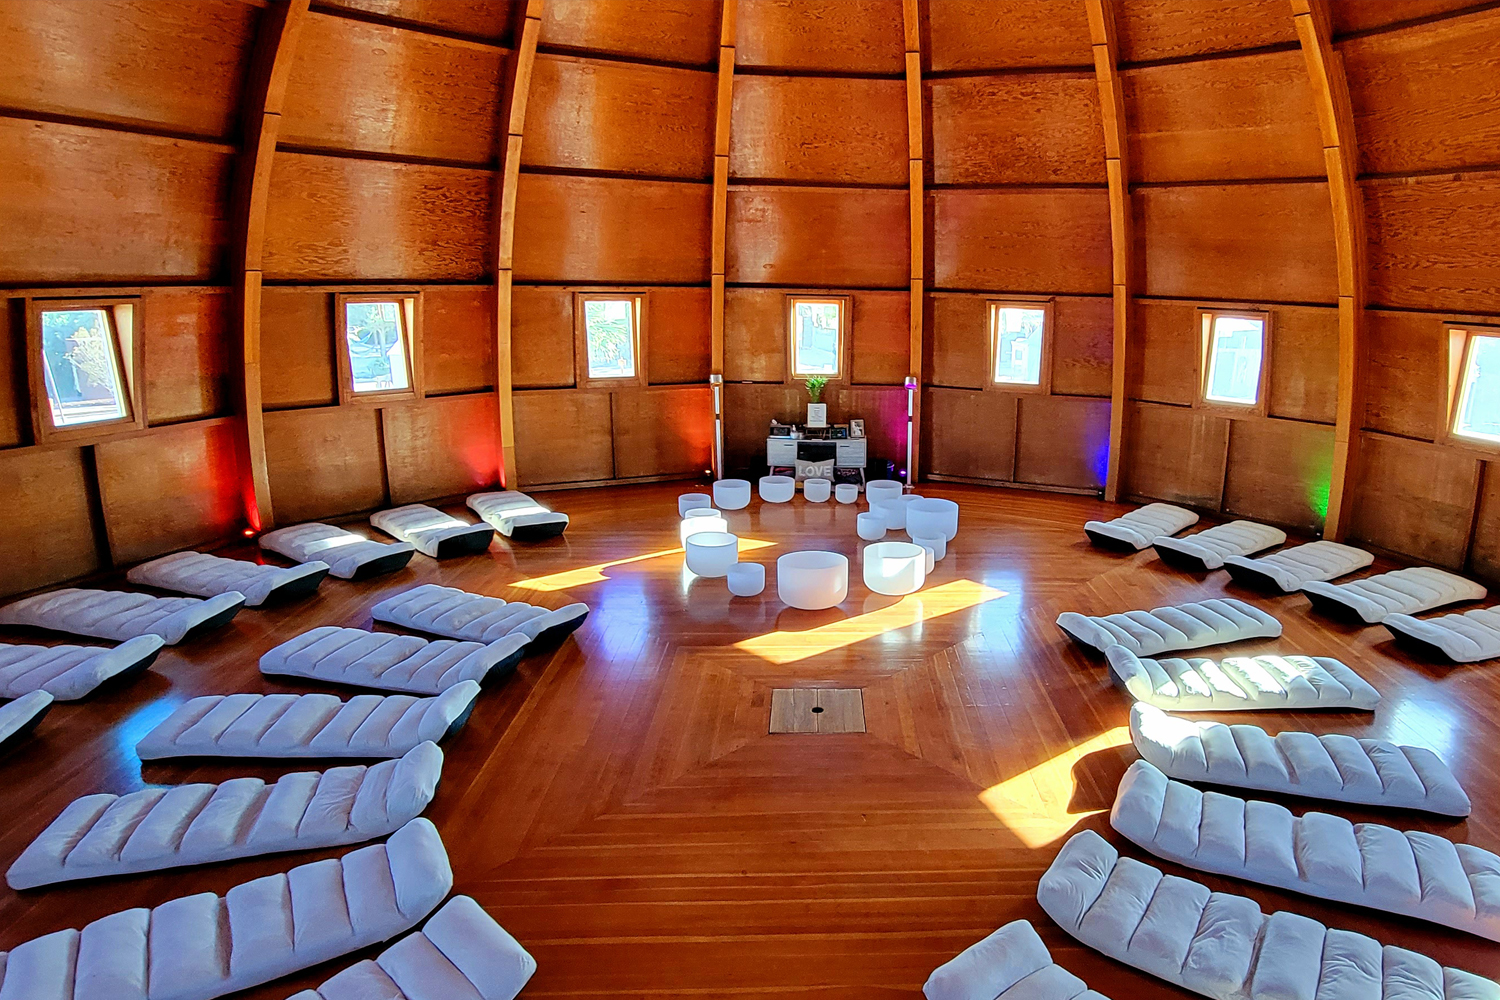 Interior view of the Integratron set up with mats and crystal bowls for a sound bath in Landers near Joshua Tree, California.